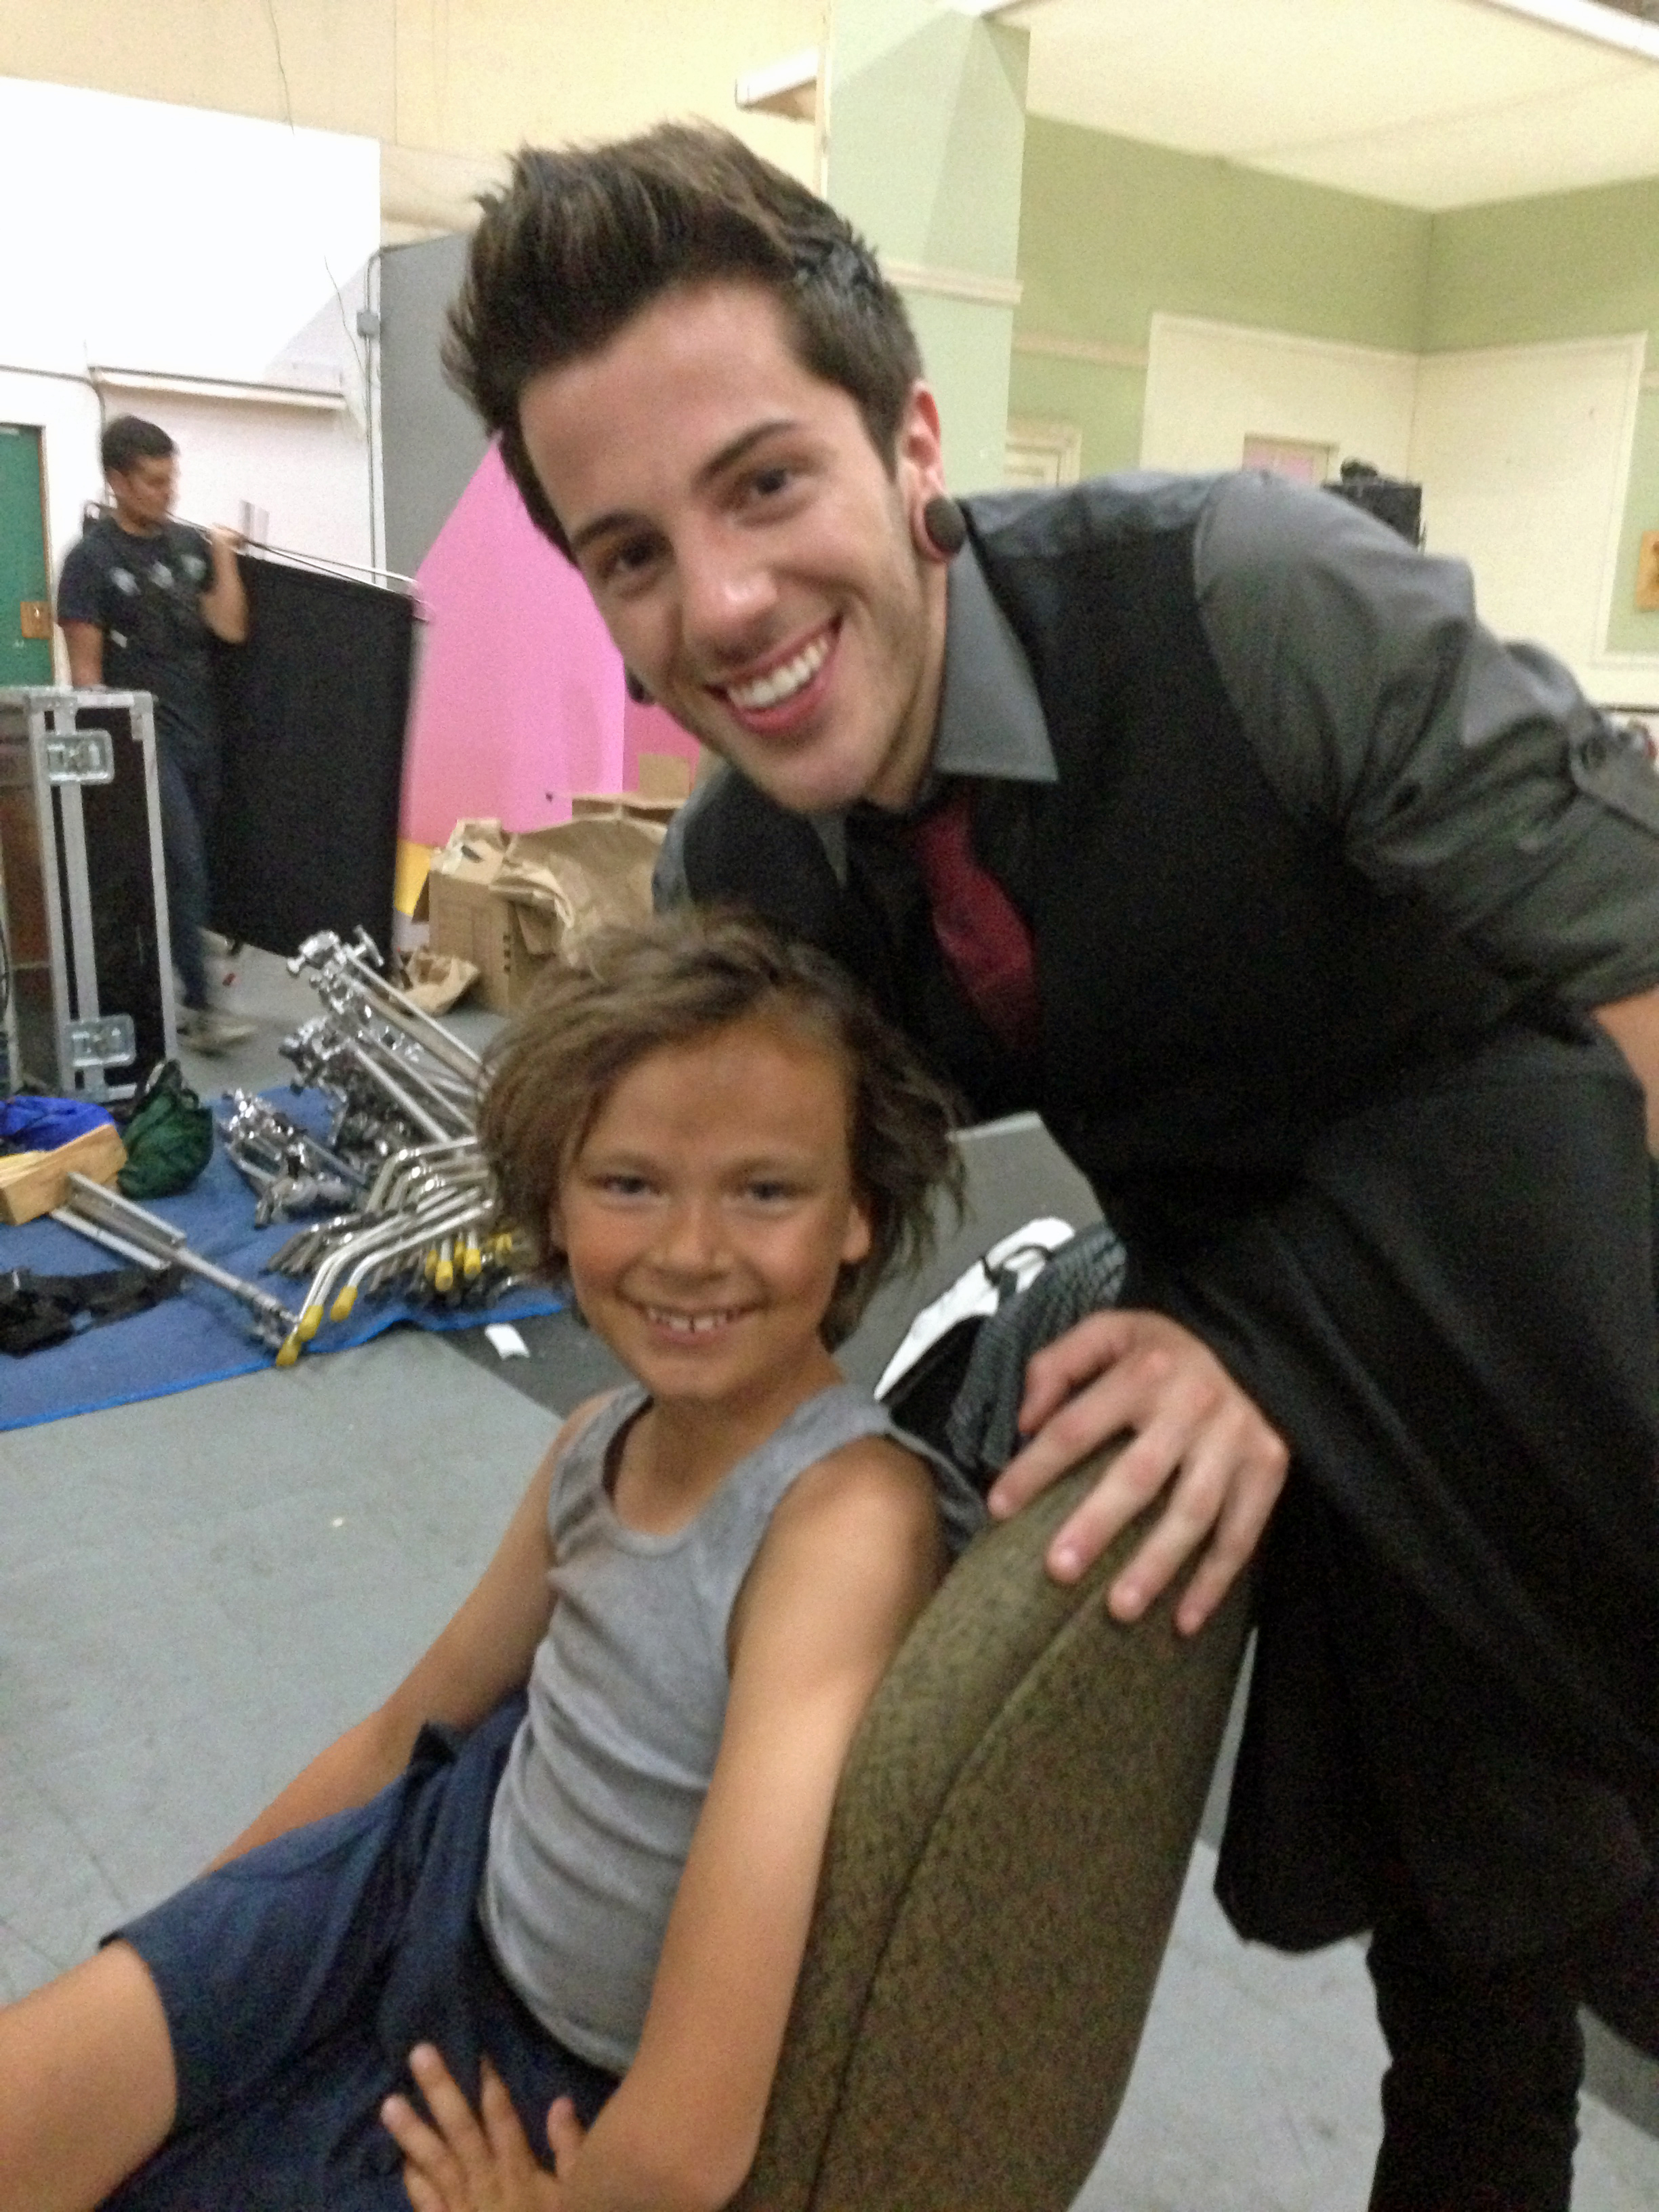 Mikey Effie with David Escamilla of Crown the Empire filming, MEMORIES OF A BROKEN HEART, music video.